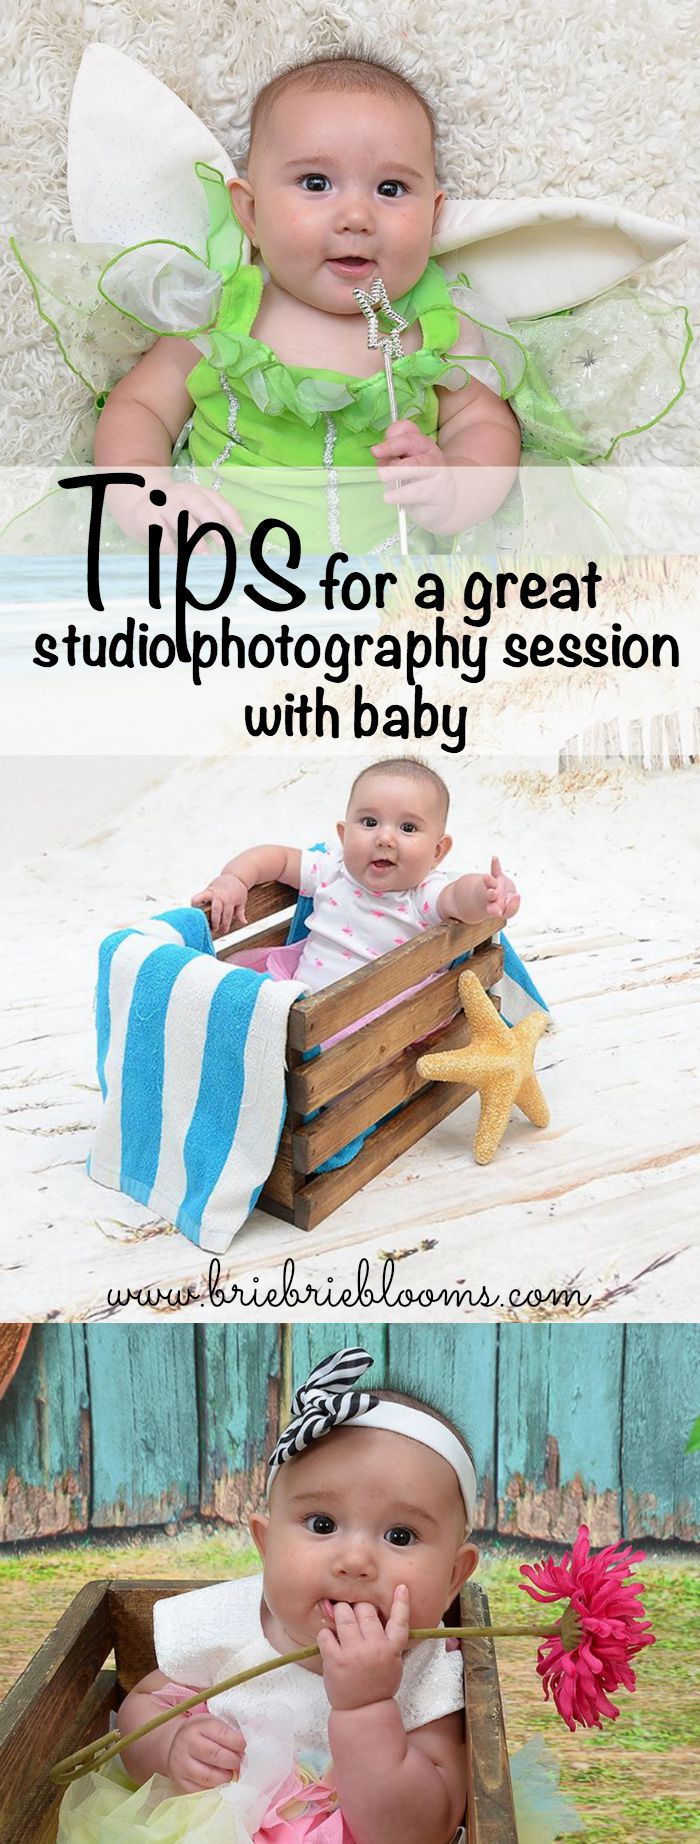 tips-for-a-great-photography-studio-session-with-baby